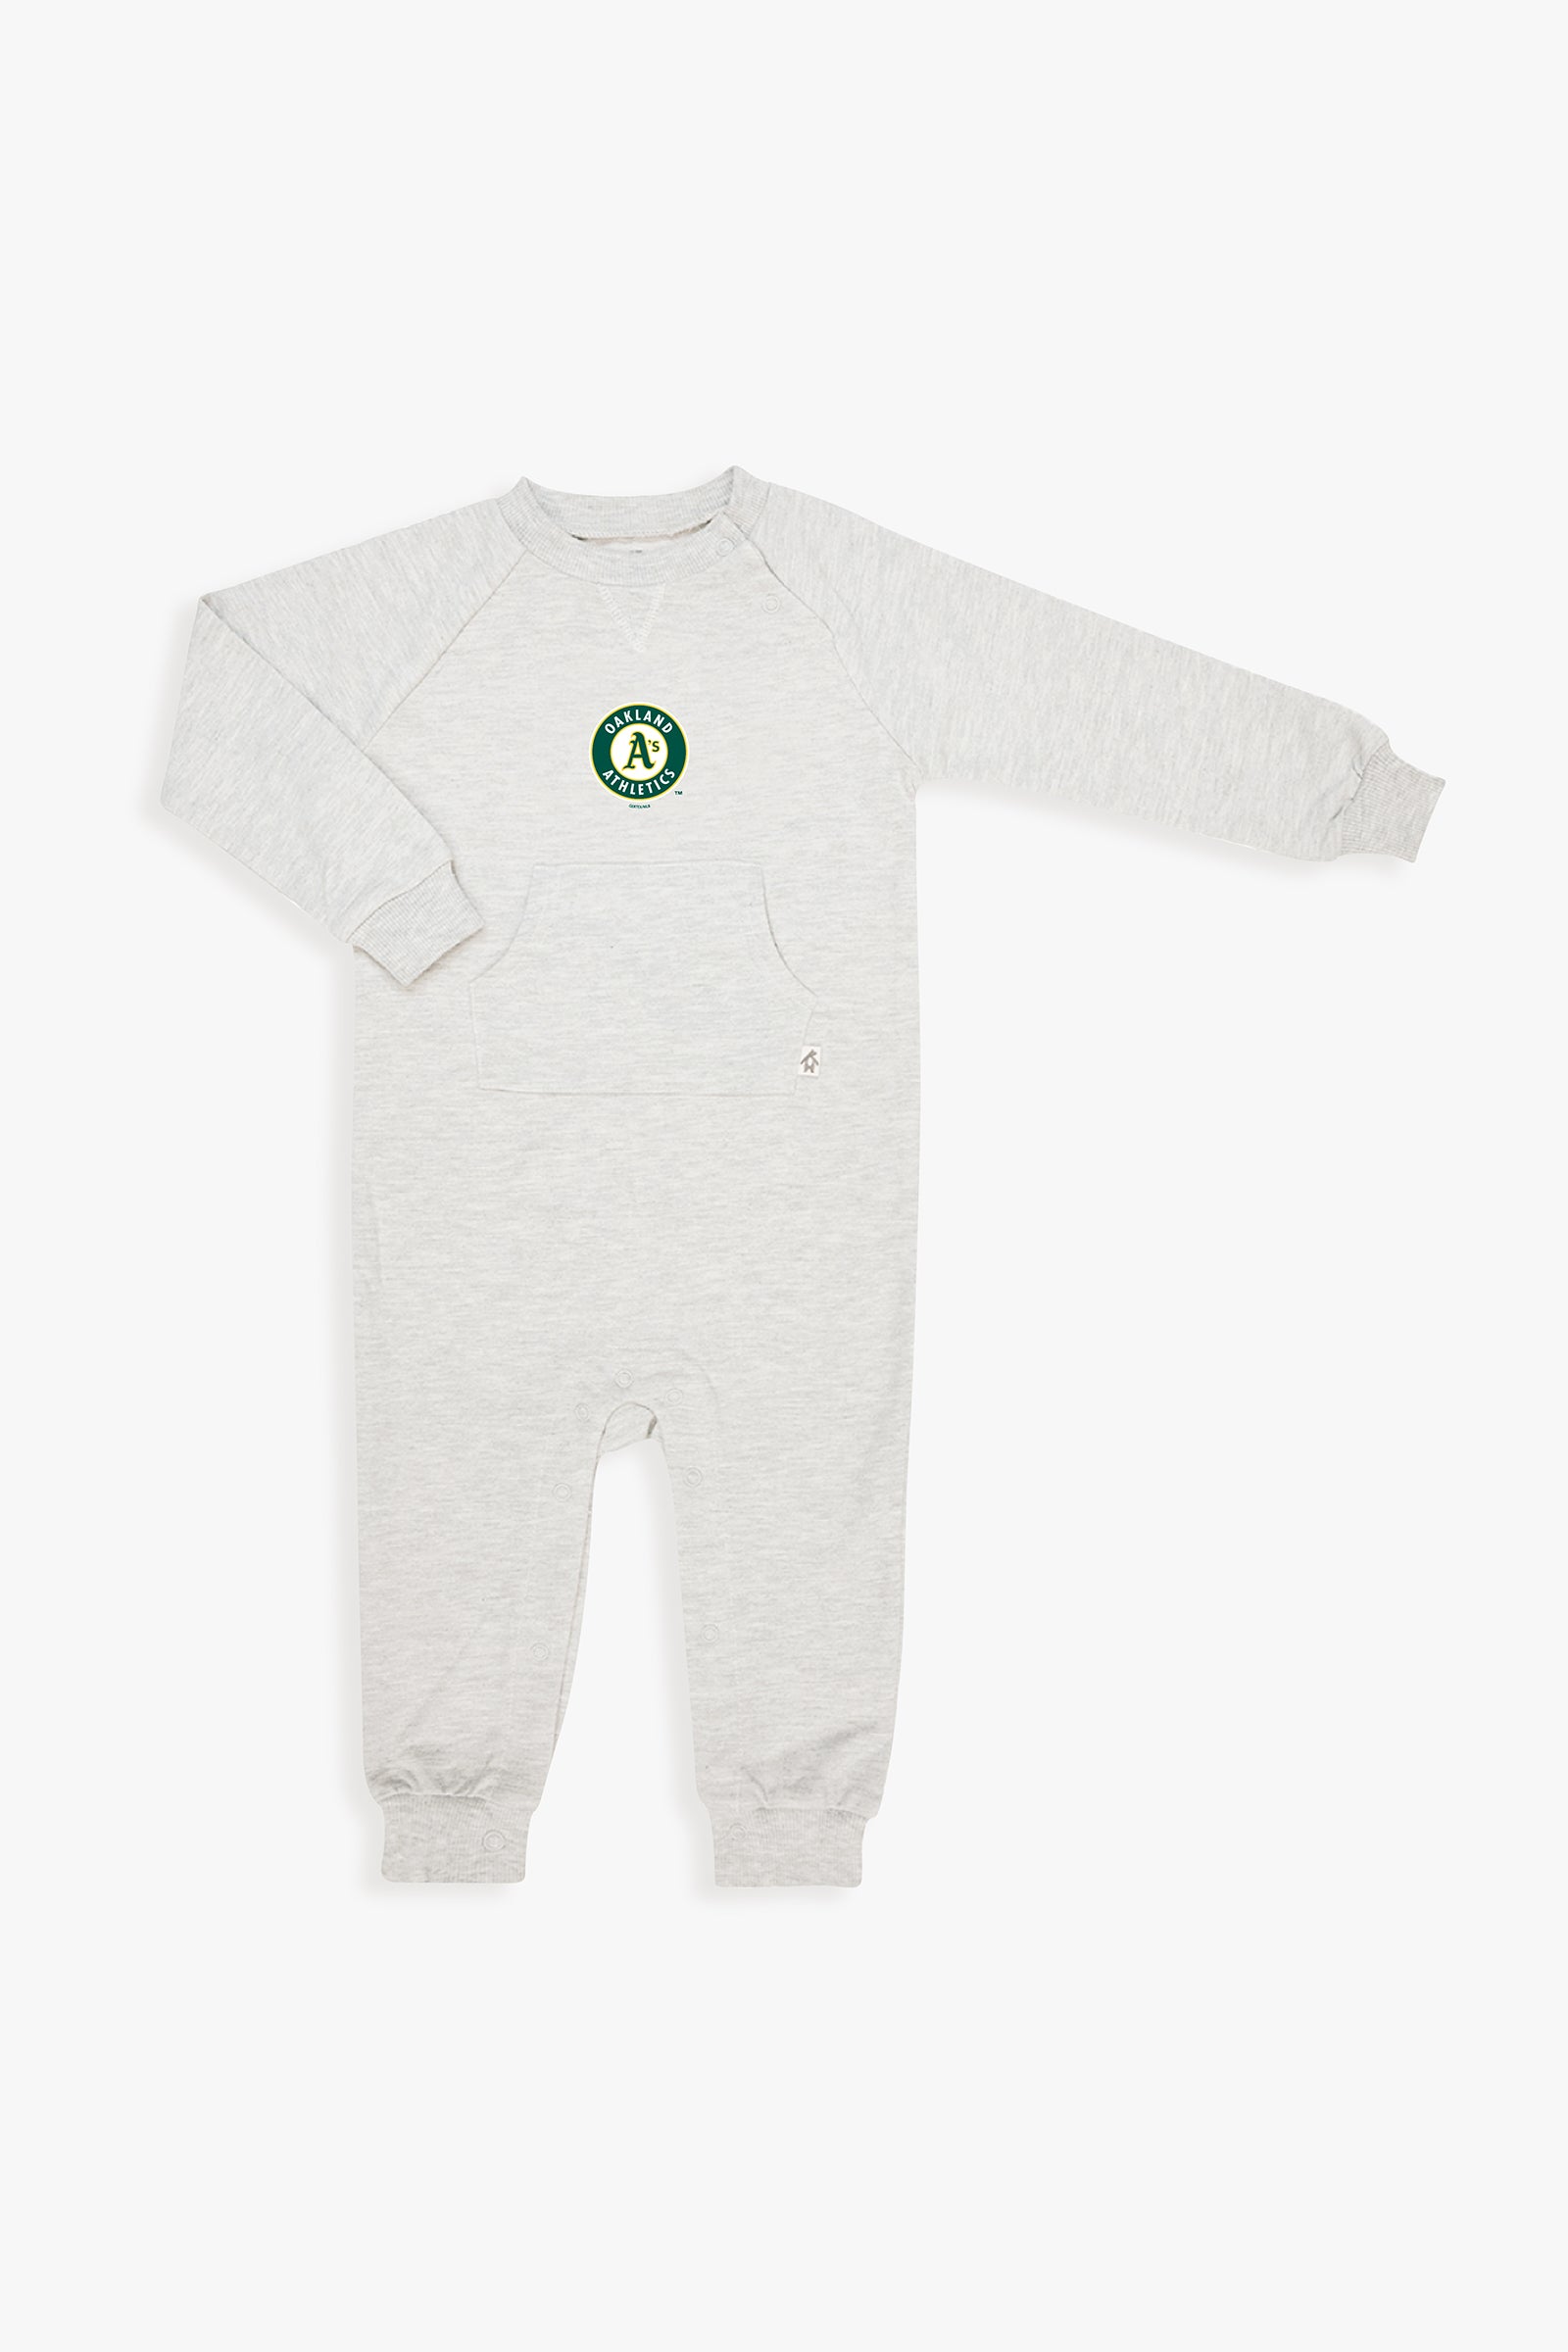 MLB Unisex Baby French Terry Onesie Jumpsuit